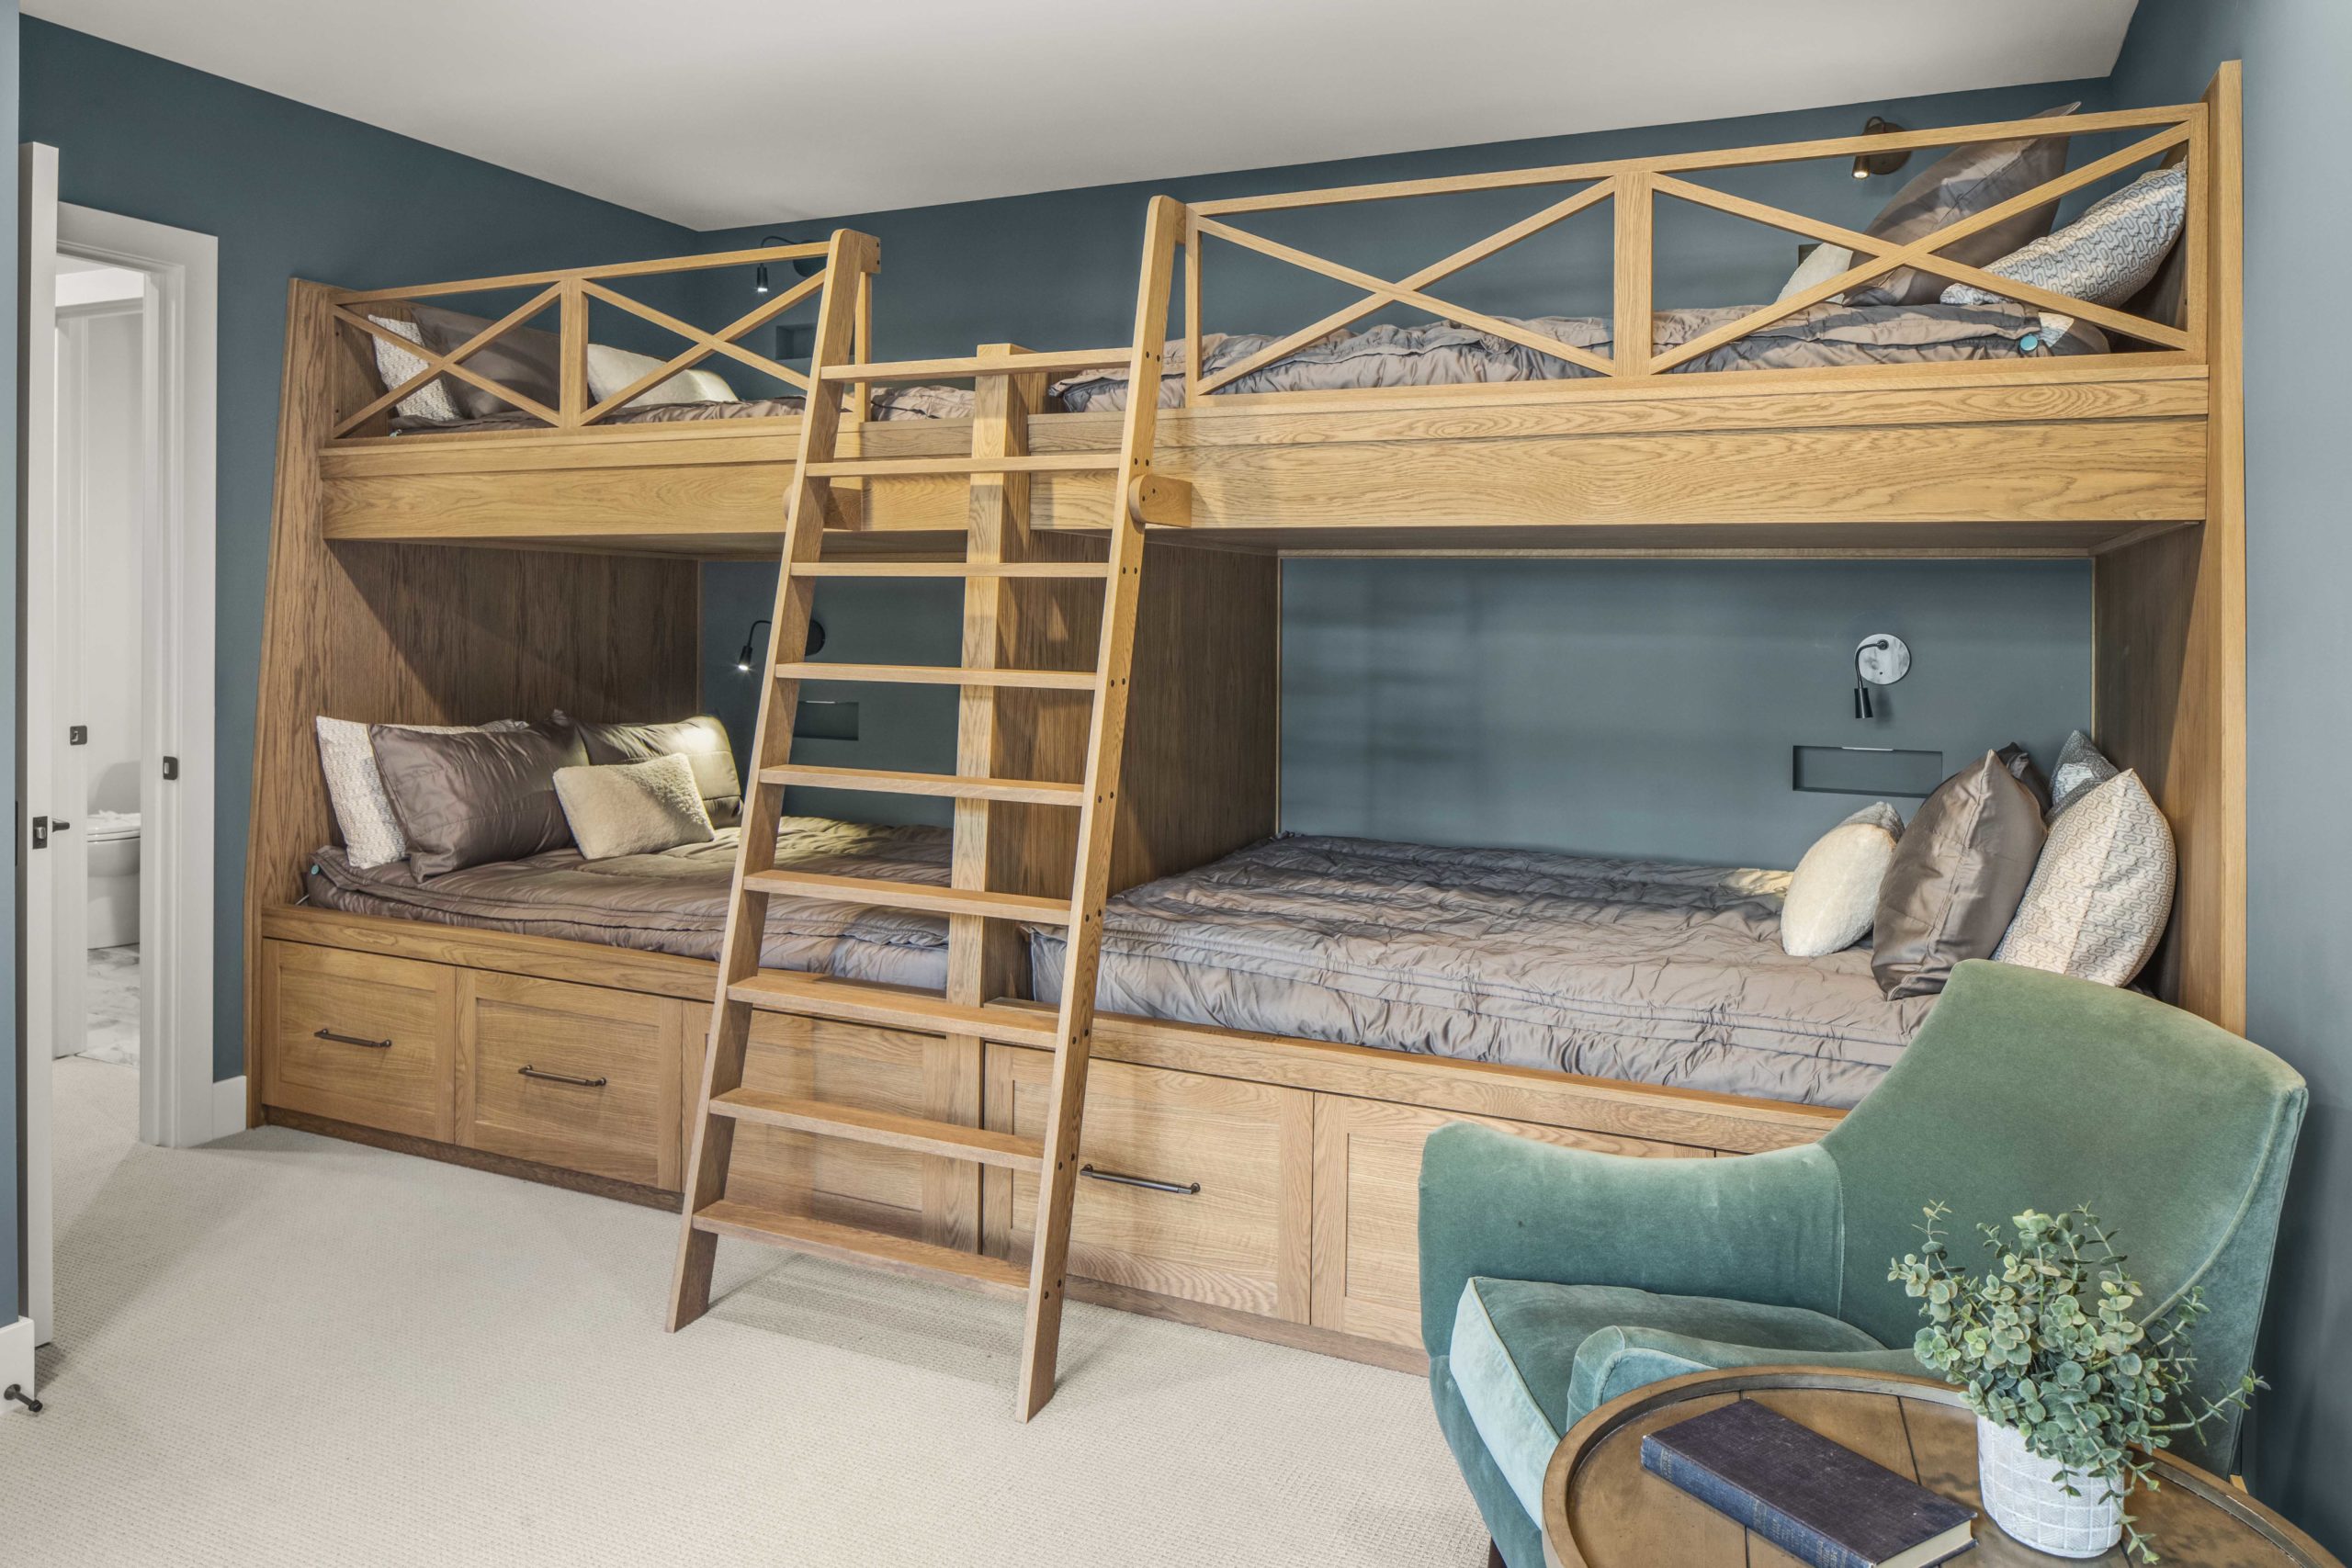 A custom lake home build featuring a bunk bed in a room with blue walls.